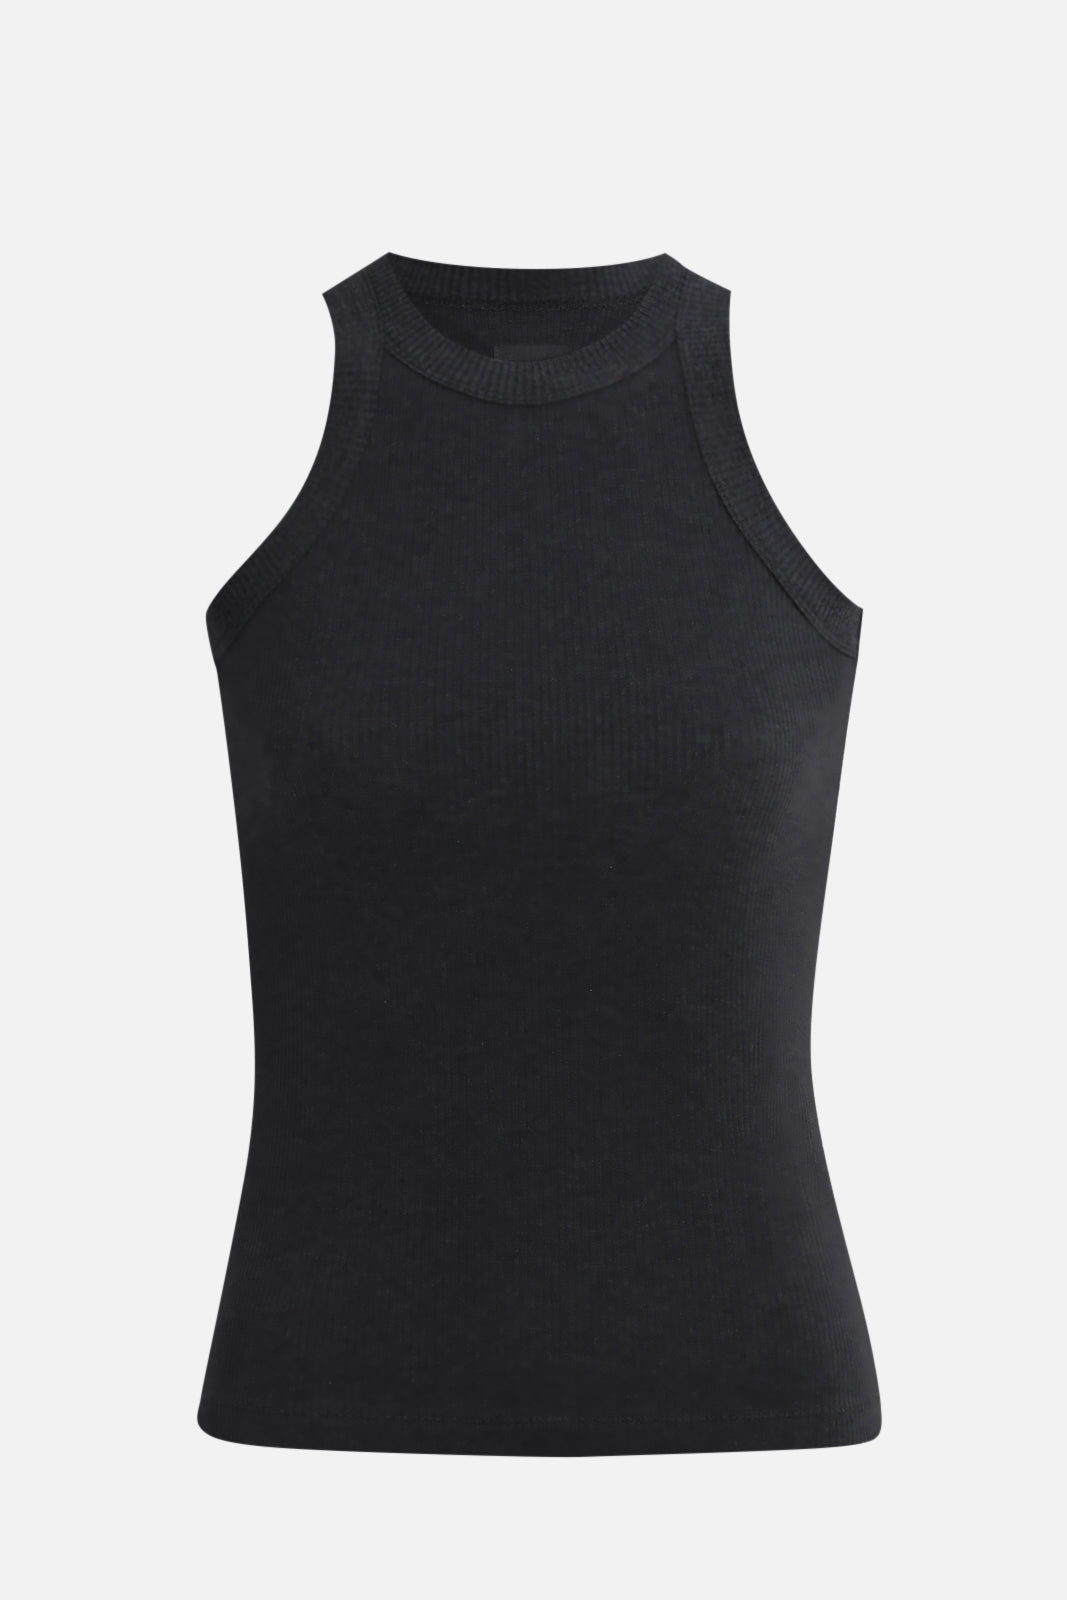 Broken Planet Women's Washed Ribbed Tank Top Washed Soot Black